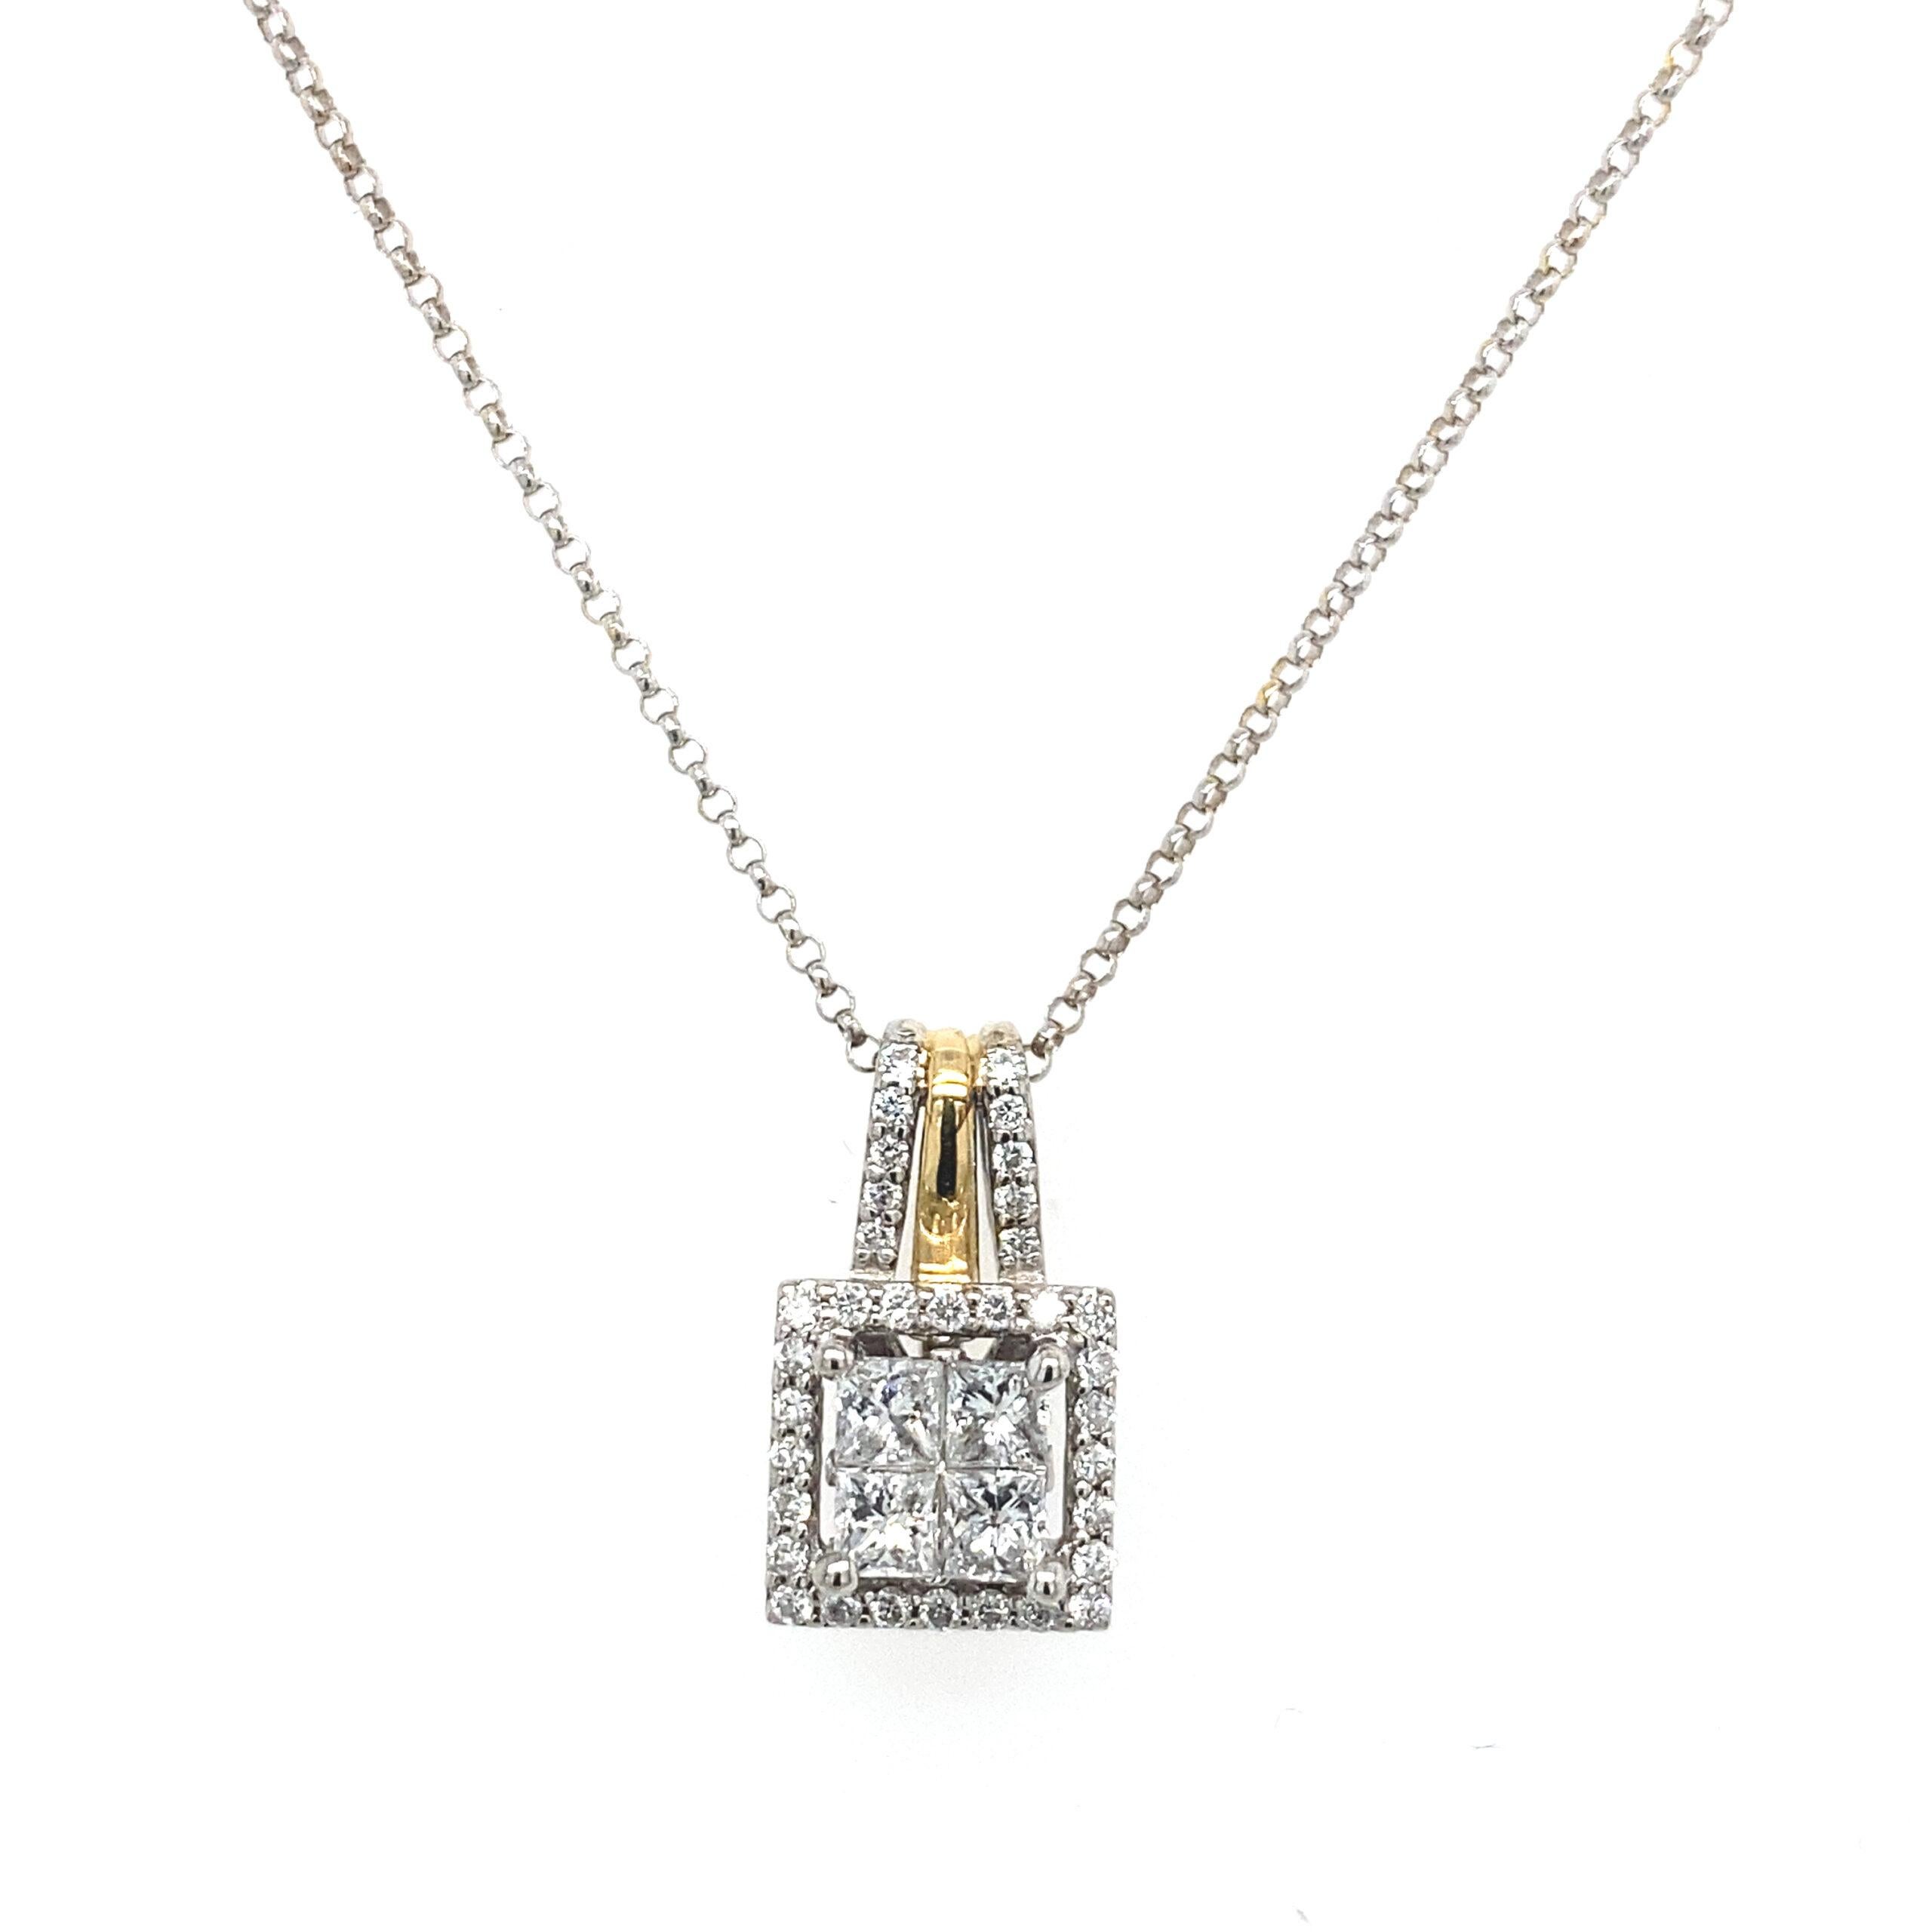 0.75ct Princess Cut & Round Brilliant Cut Diamond Pendant Set in 14ct White Gold with Yellow Gold Accent on a Pendant Loop.

Additional Information:
Total Diamond Weight: 0.75ct
Diamond Colour: G/H
Diamond Clarity: SI
Total Weight: 3.7g 
Chain